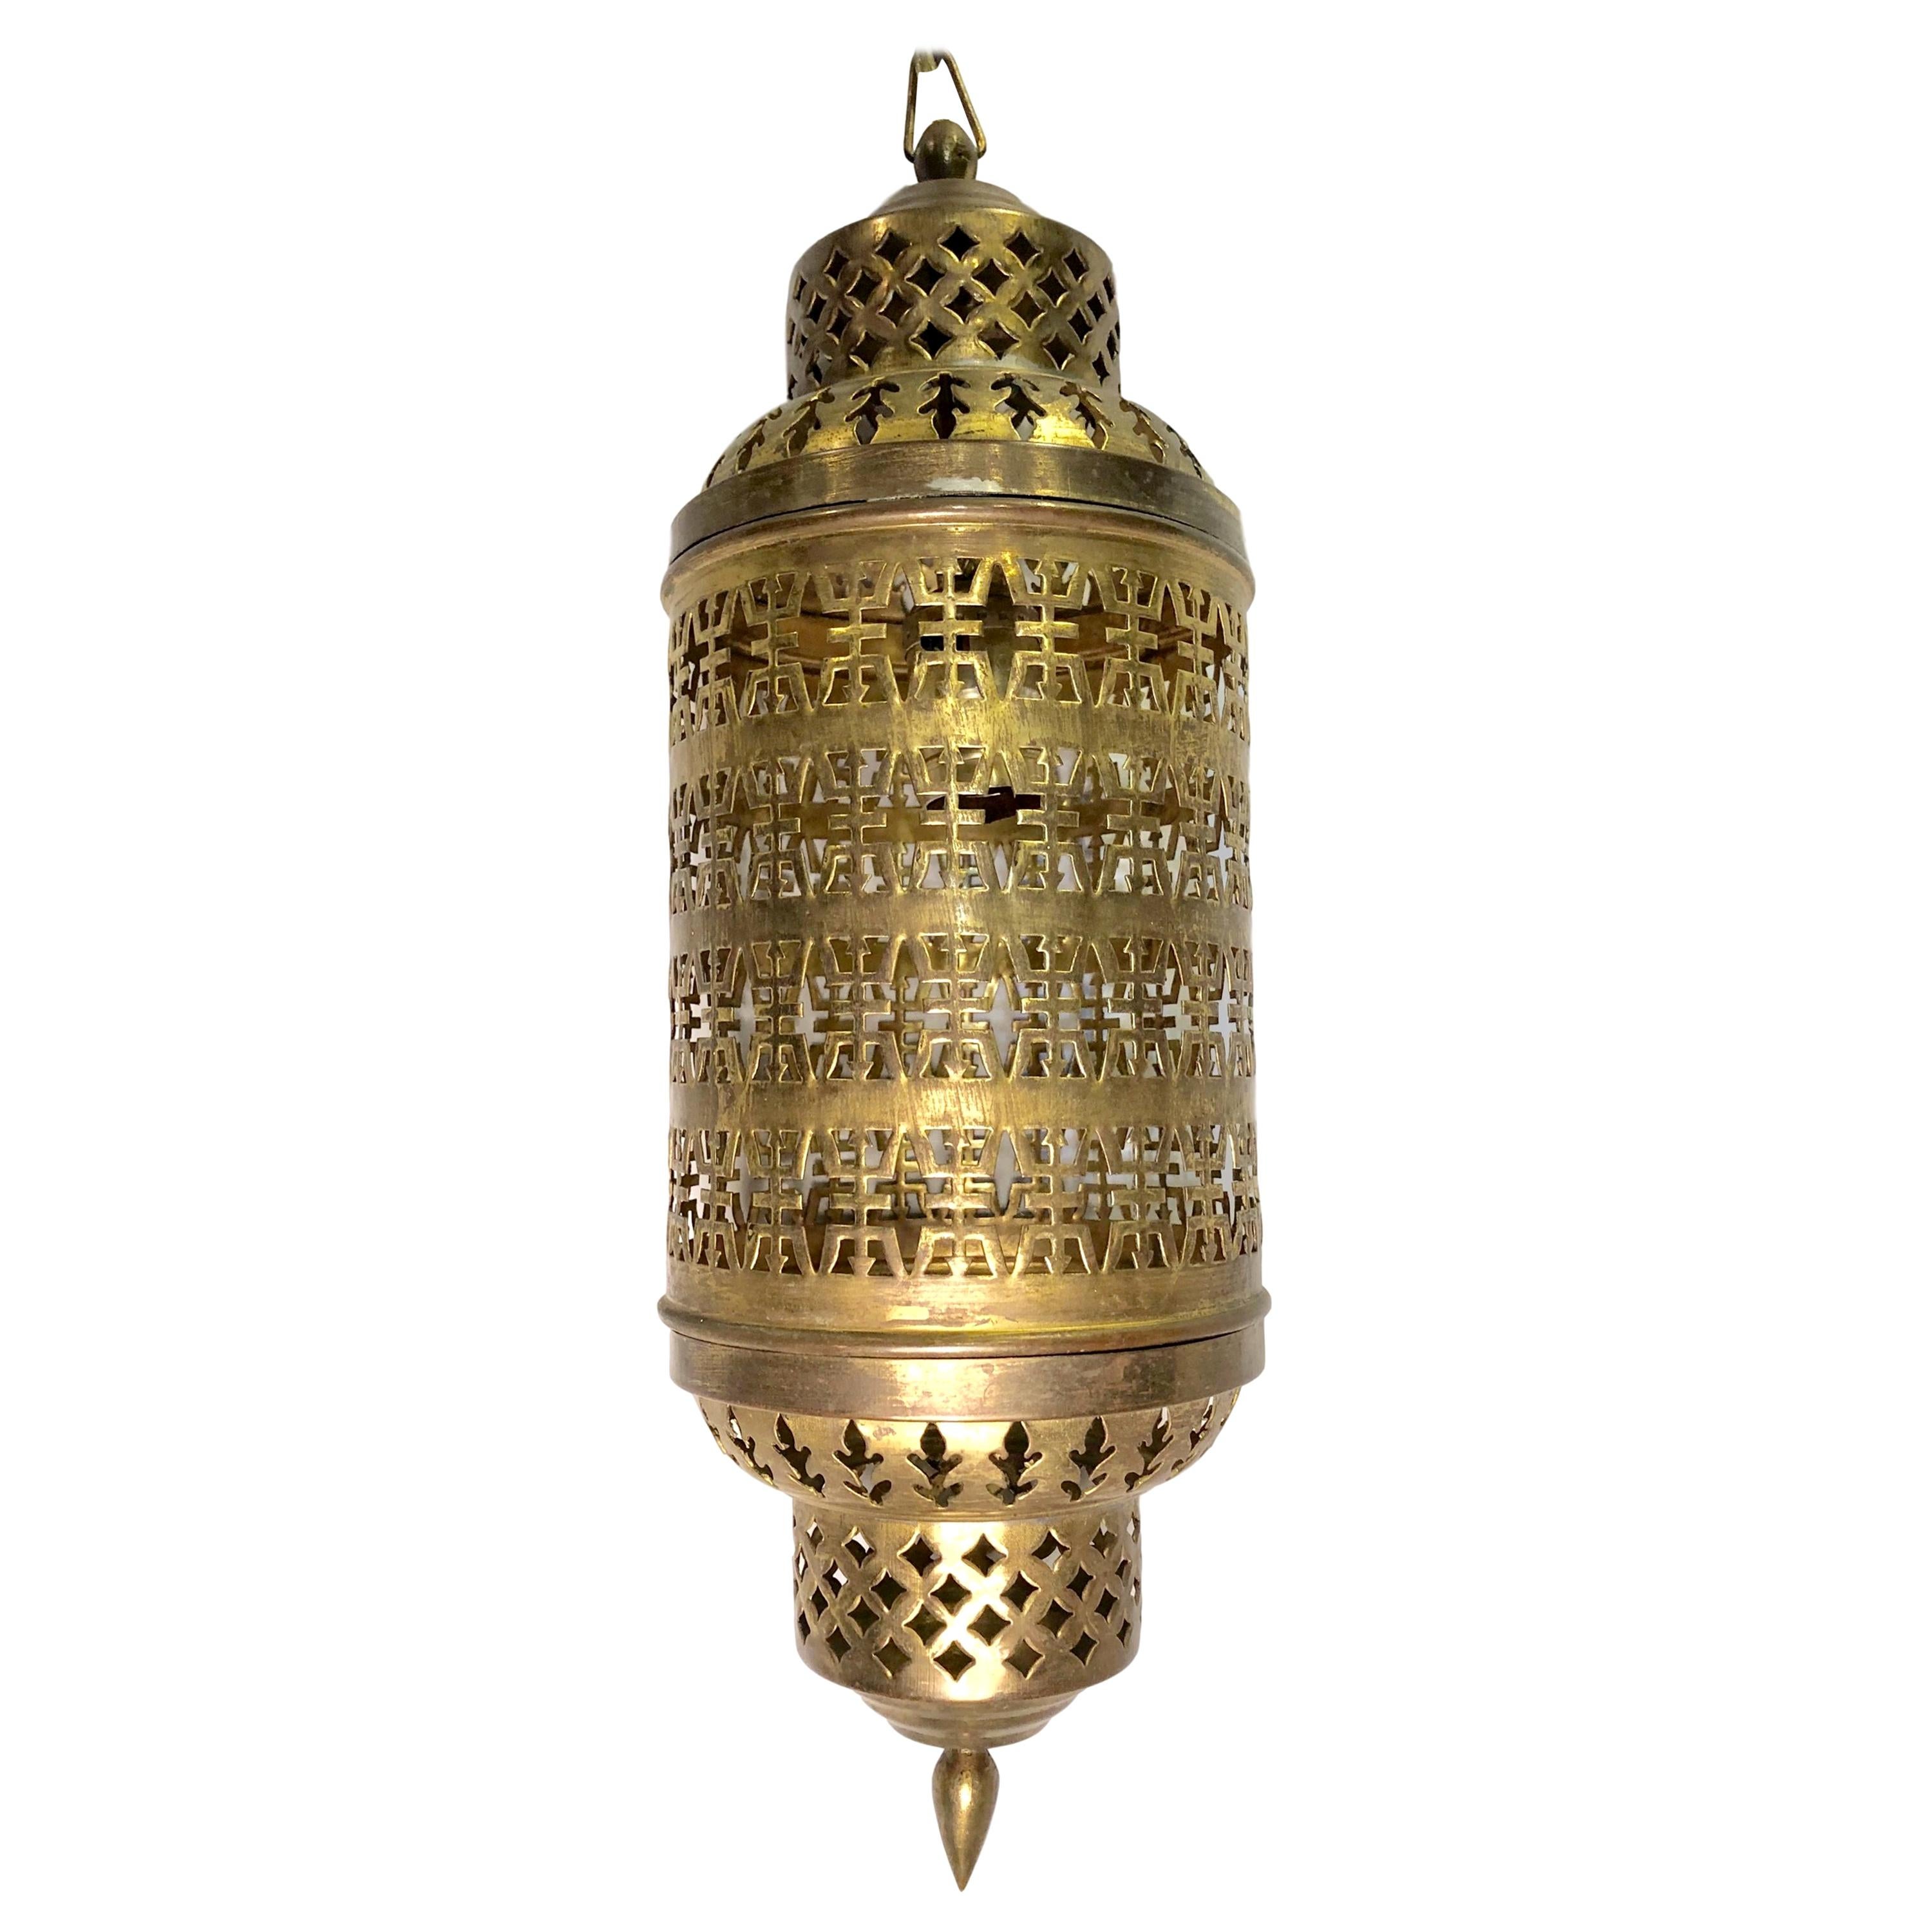 Hammered and Pierced Middle Eastern Lantern For Sale